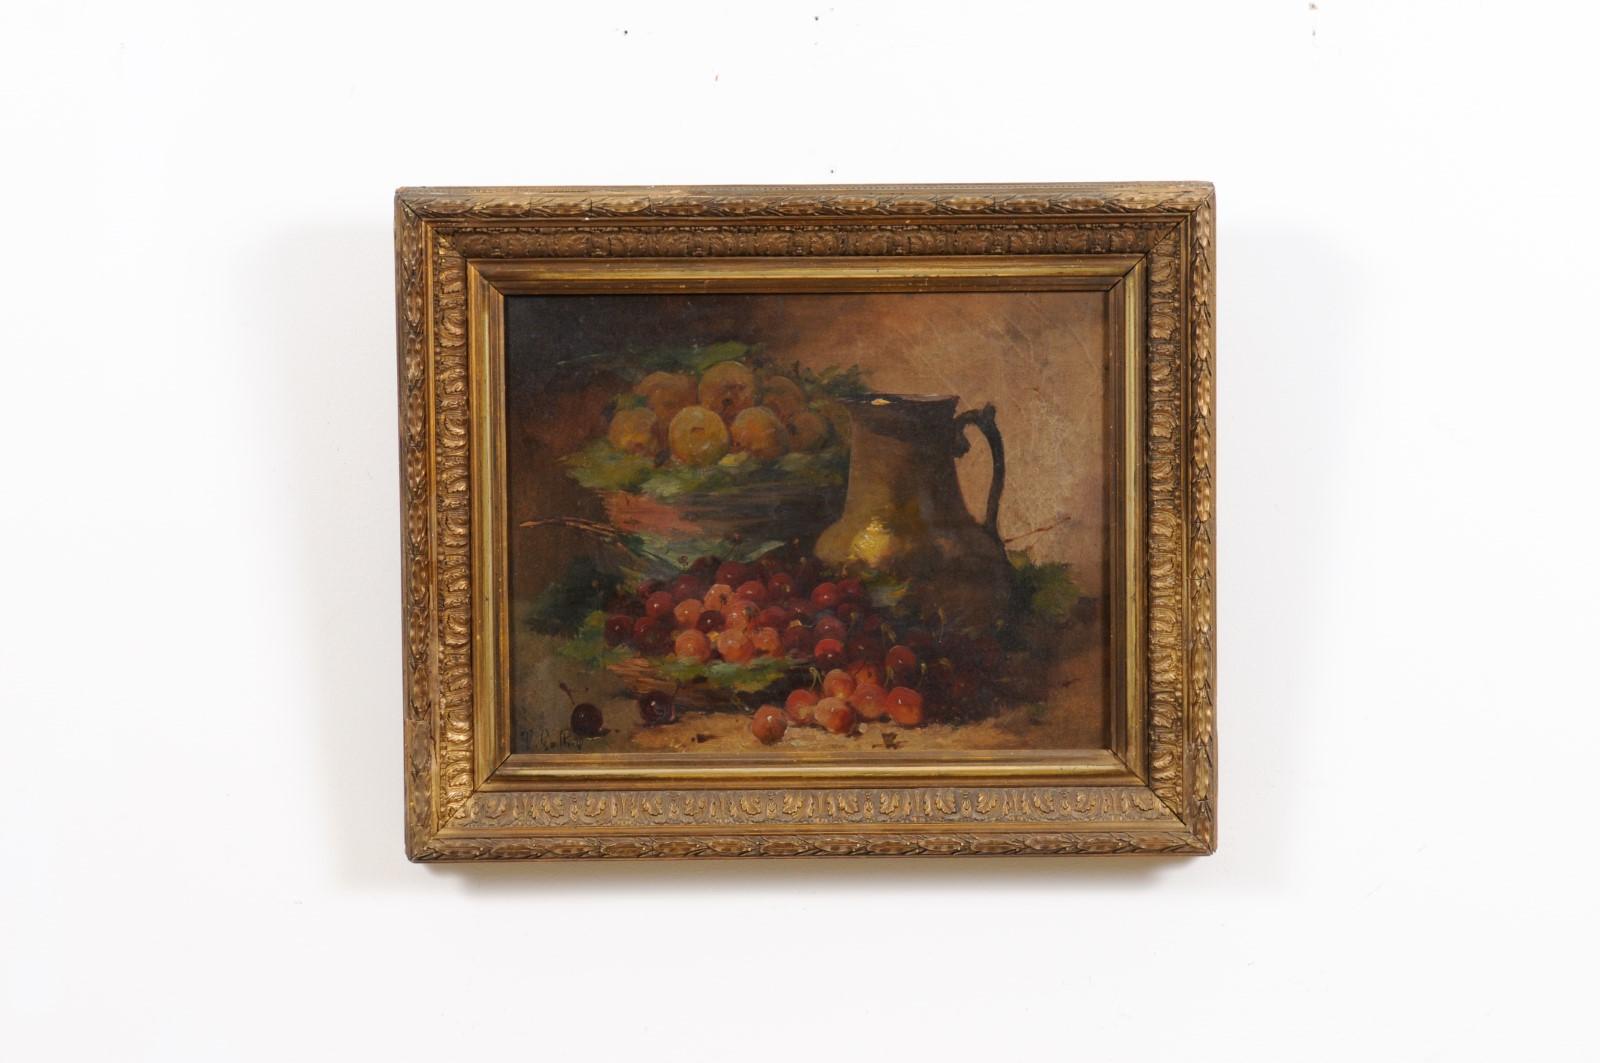 A French Louis XVI period oil on canvas still life framed painting from the 18th century, depicting a jug and fruits. Created in France during the 18th century, this oil on canvas painting features a mouth-watering arrangement of grapes and possibly